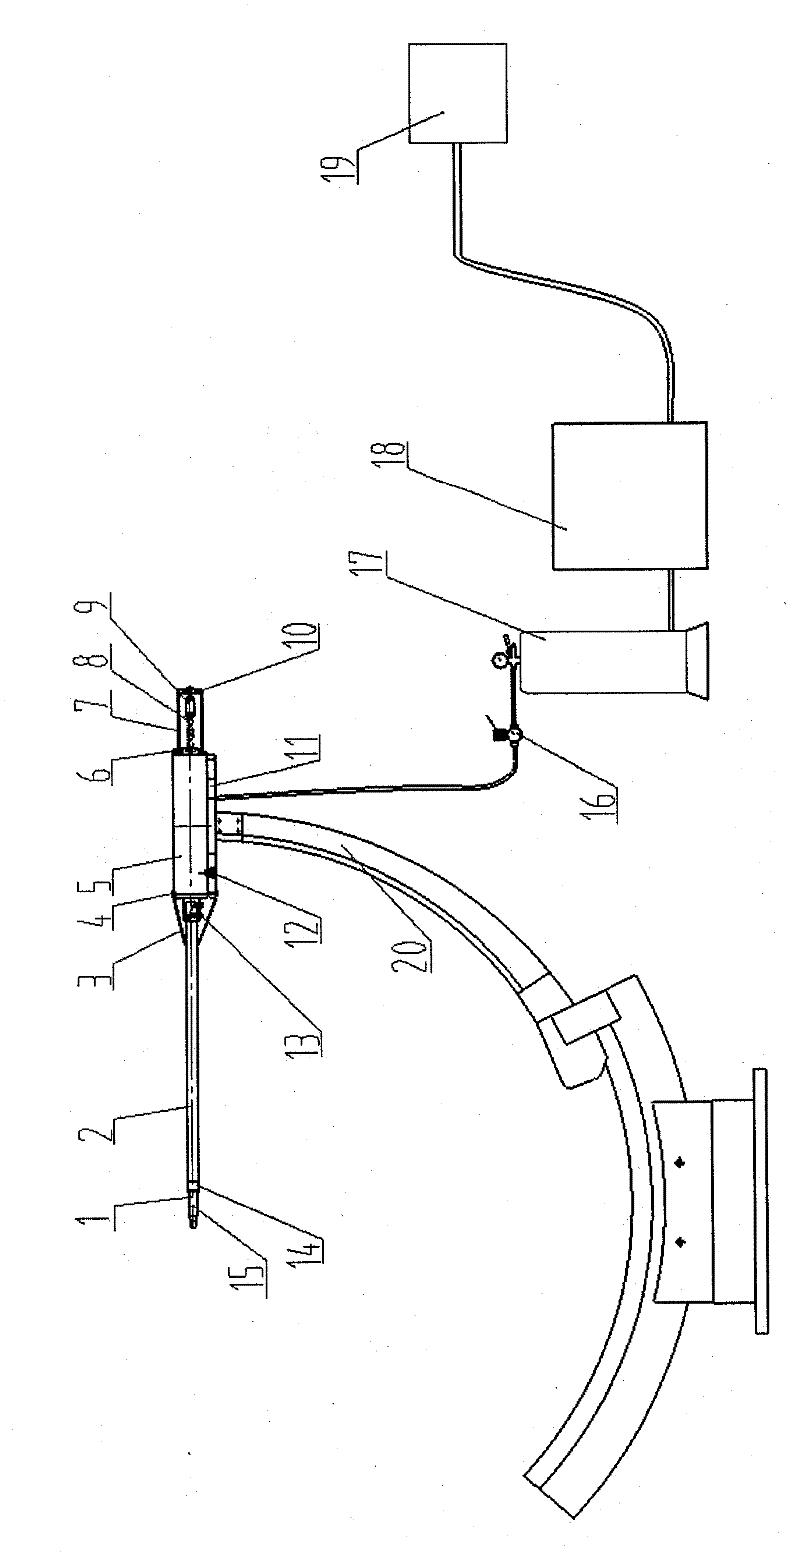 Air flotation force measuring device of wind tunnel model